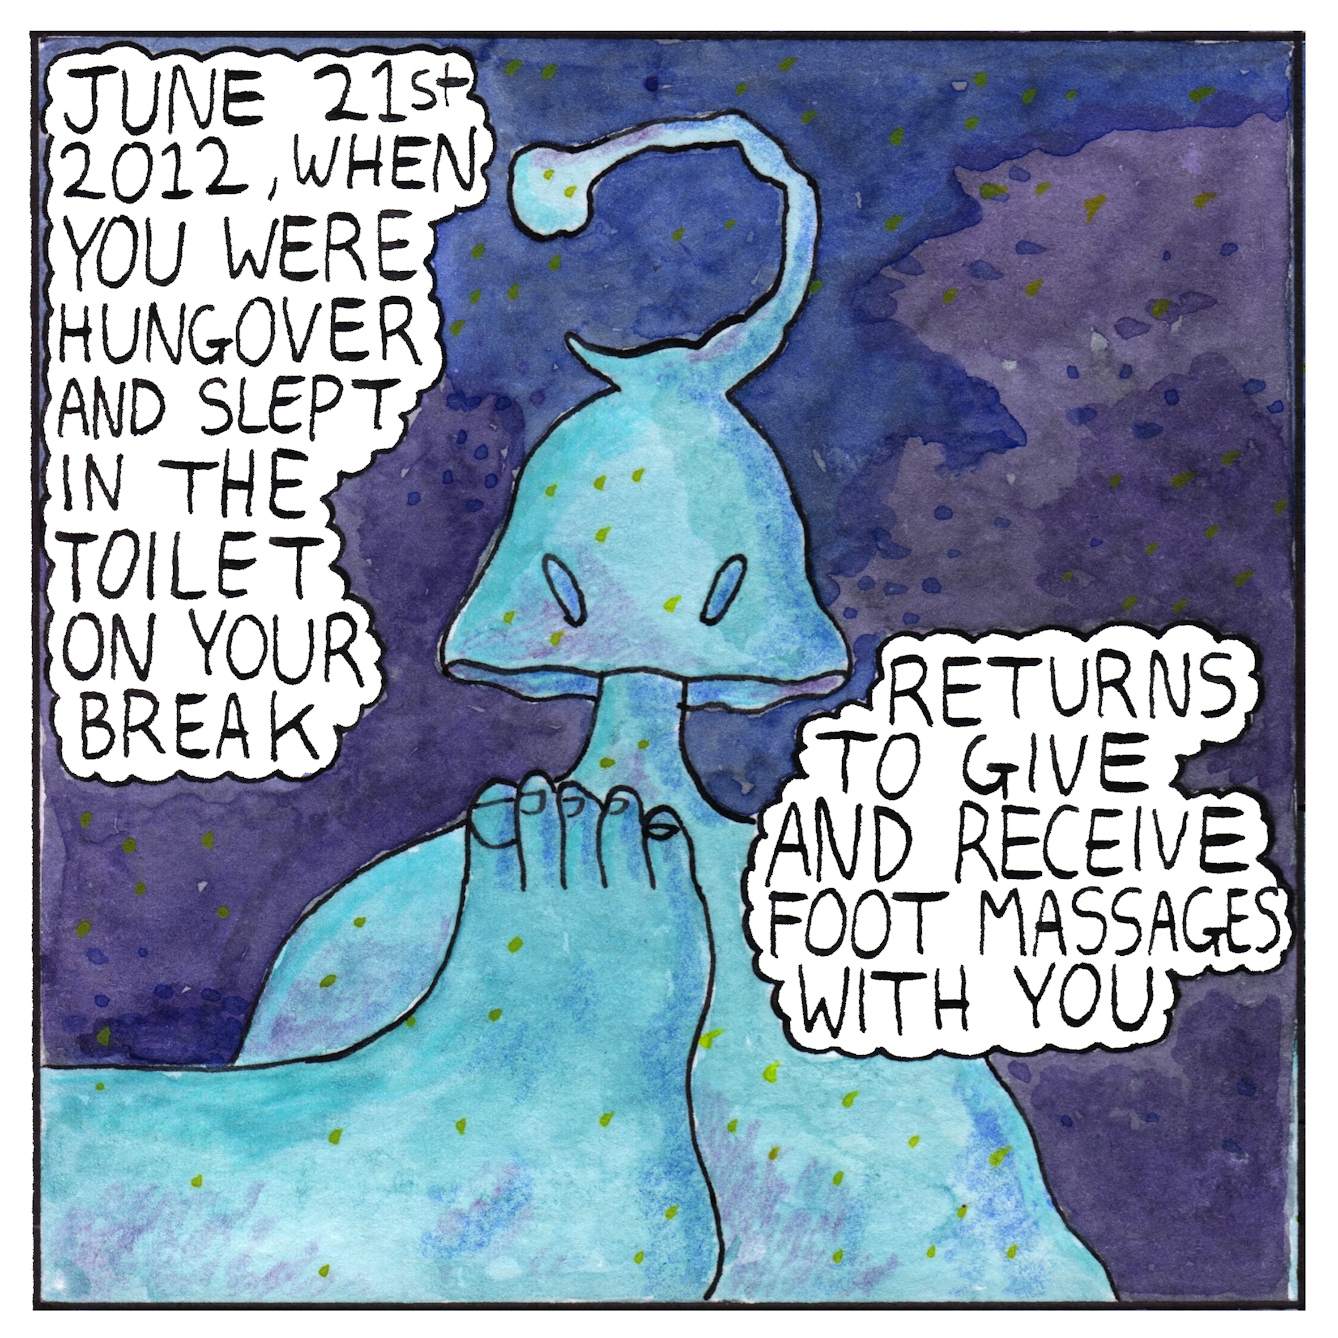 Panel three of a six-panel comic made with ink, watercolour and colour pencils: An ominous caped figure stands in a deep purple background. They have a a bell-like hood for a head, topped with a craggy letter 'C' shape. The figure hovers behind a large naked foot. Two text bubbles either side of the figure read: “June 21st 2012, when you were hungover and slept in the toilet on your break, returns to give and receive foot massages with you”